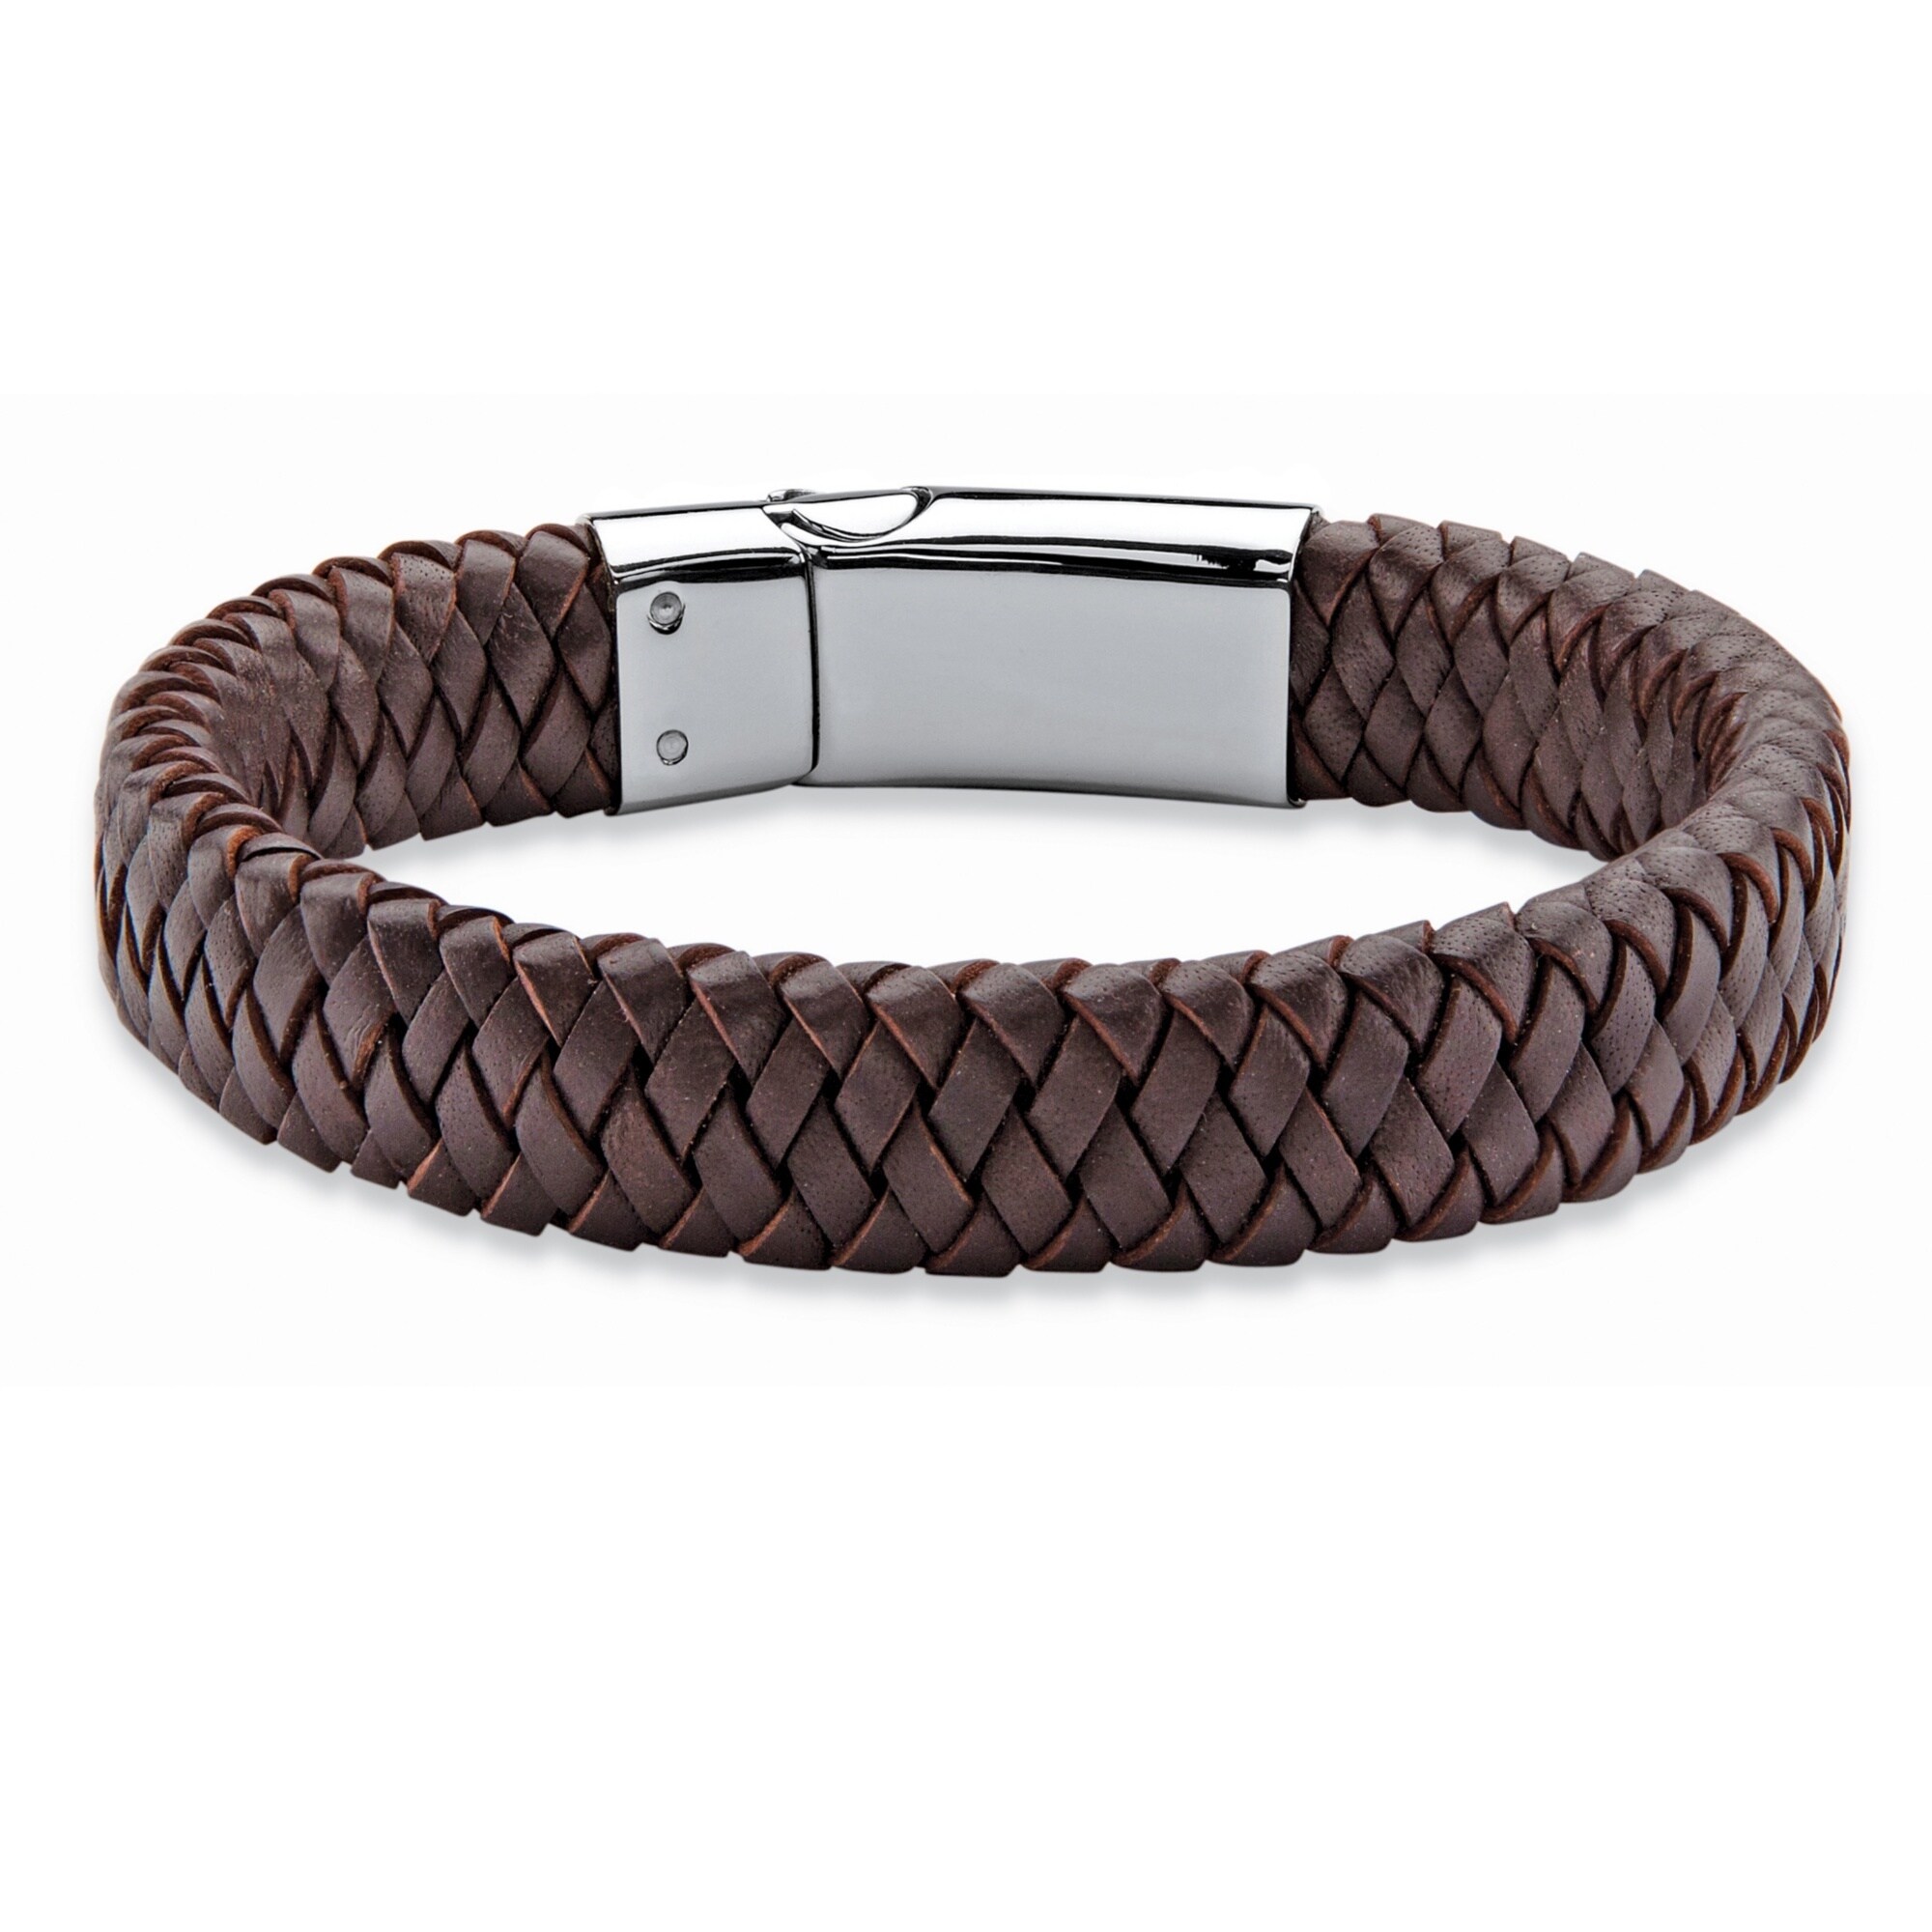 Braided Leather Bracelet for Men with Magnetic Clasp 13.77 Coffee ZODRQ Mens Bracelet Stainless Steel